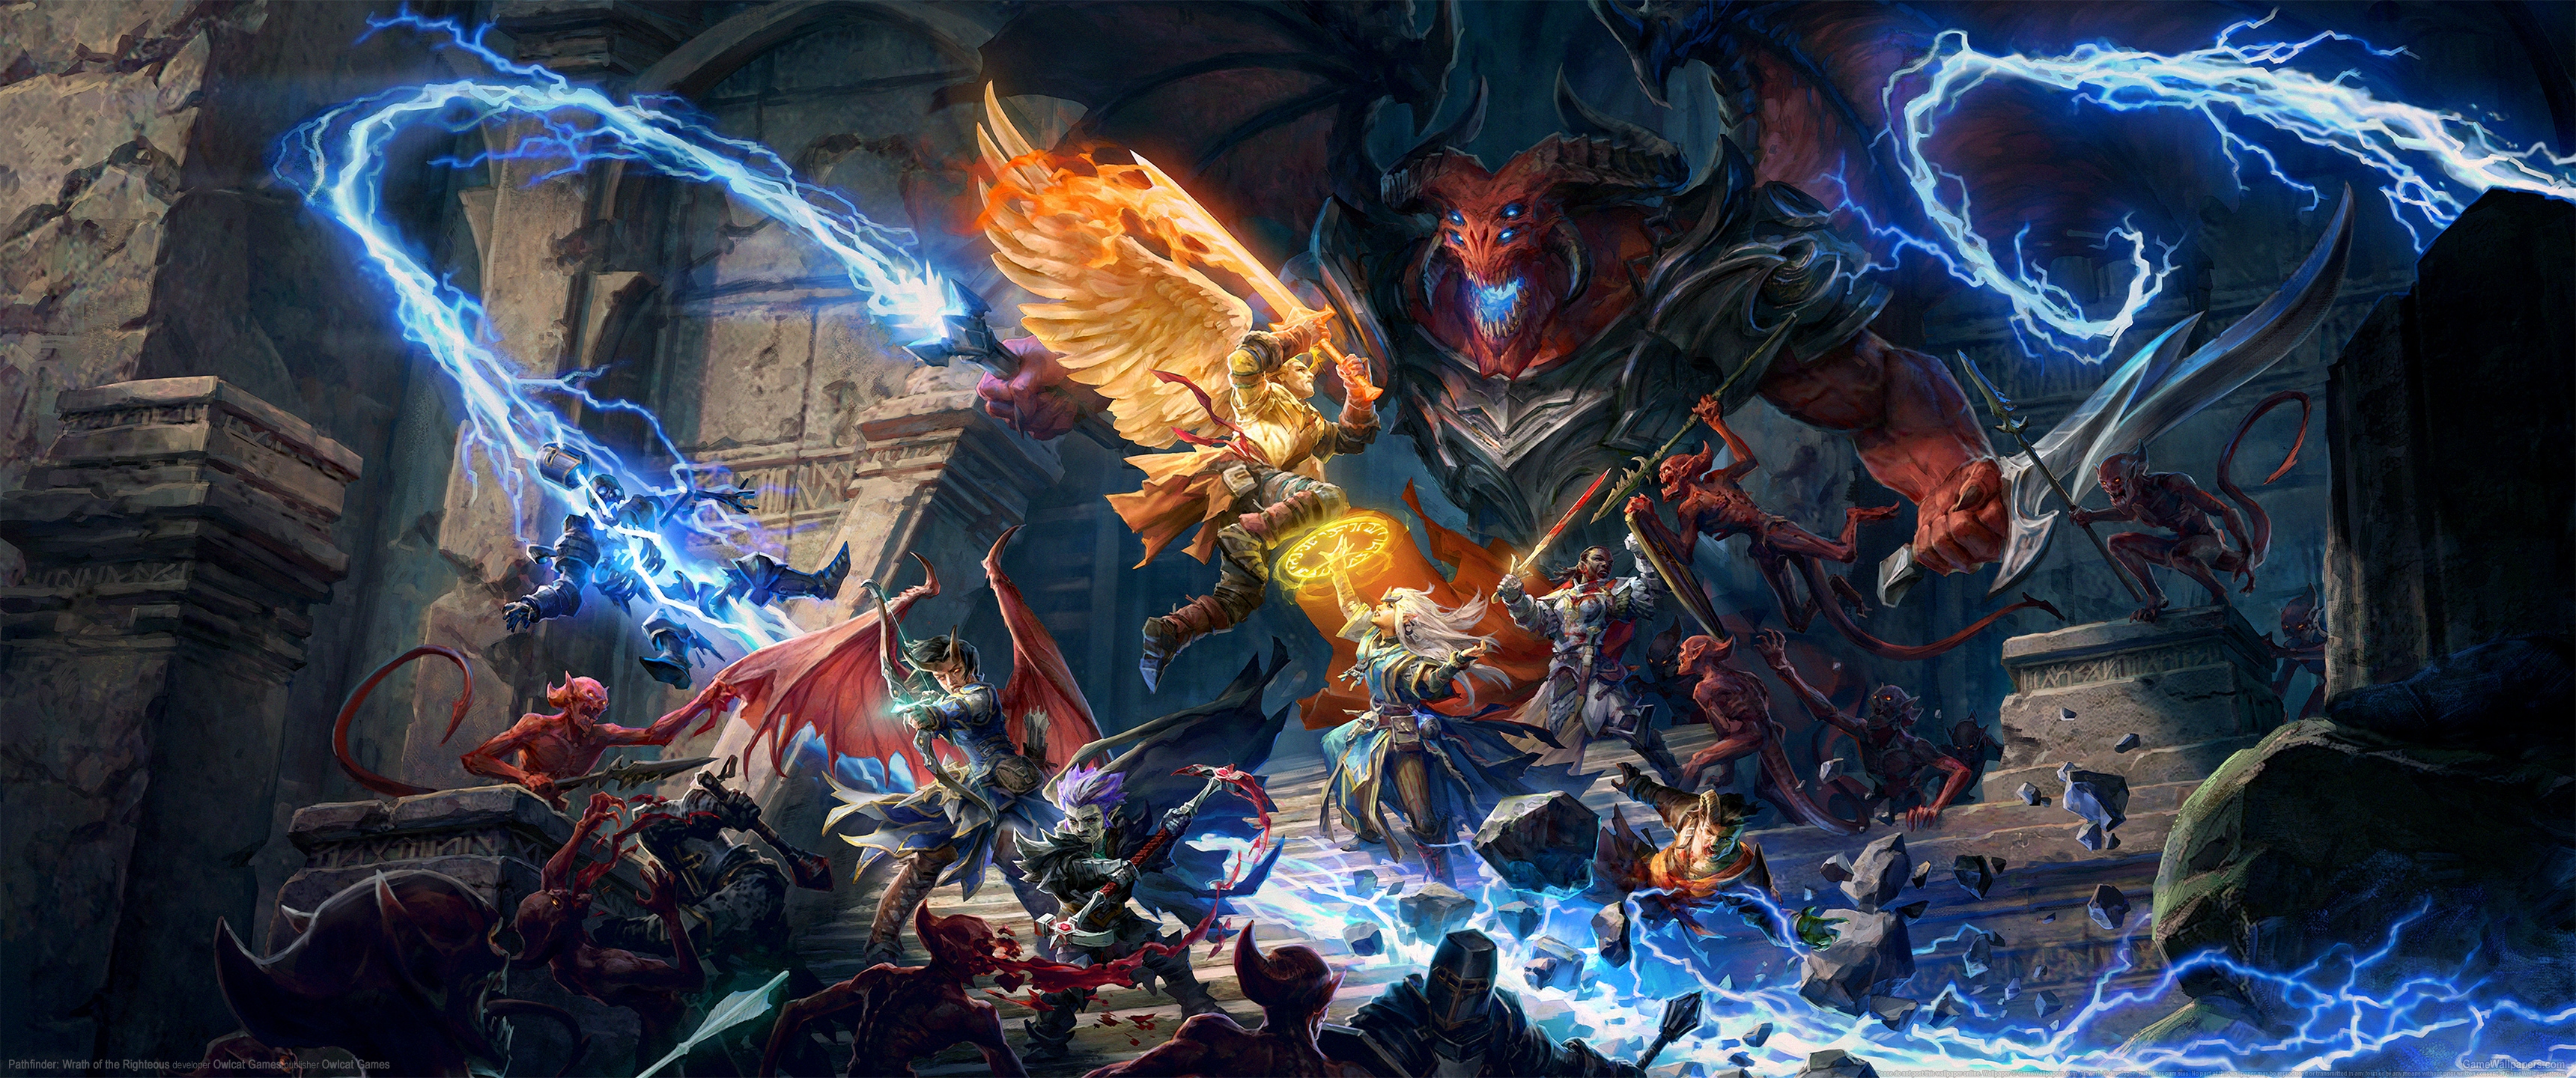 Pathfinder: Wrath of the Righteous 3440x1440 wallpaper or background 01